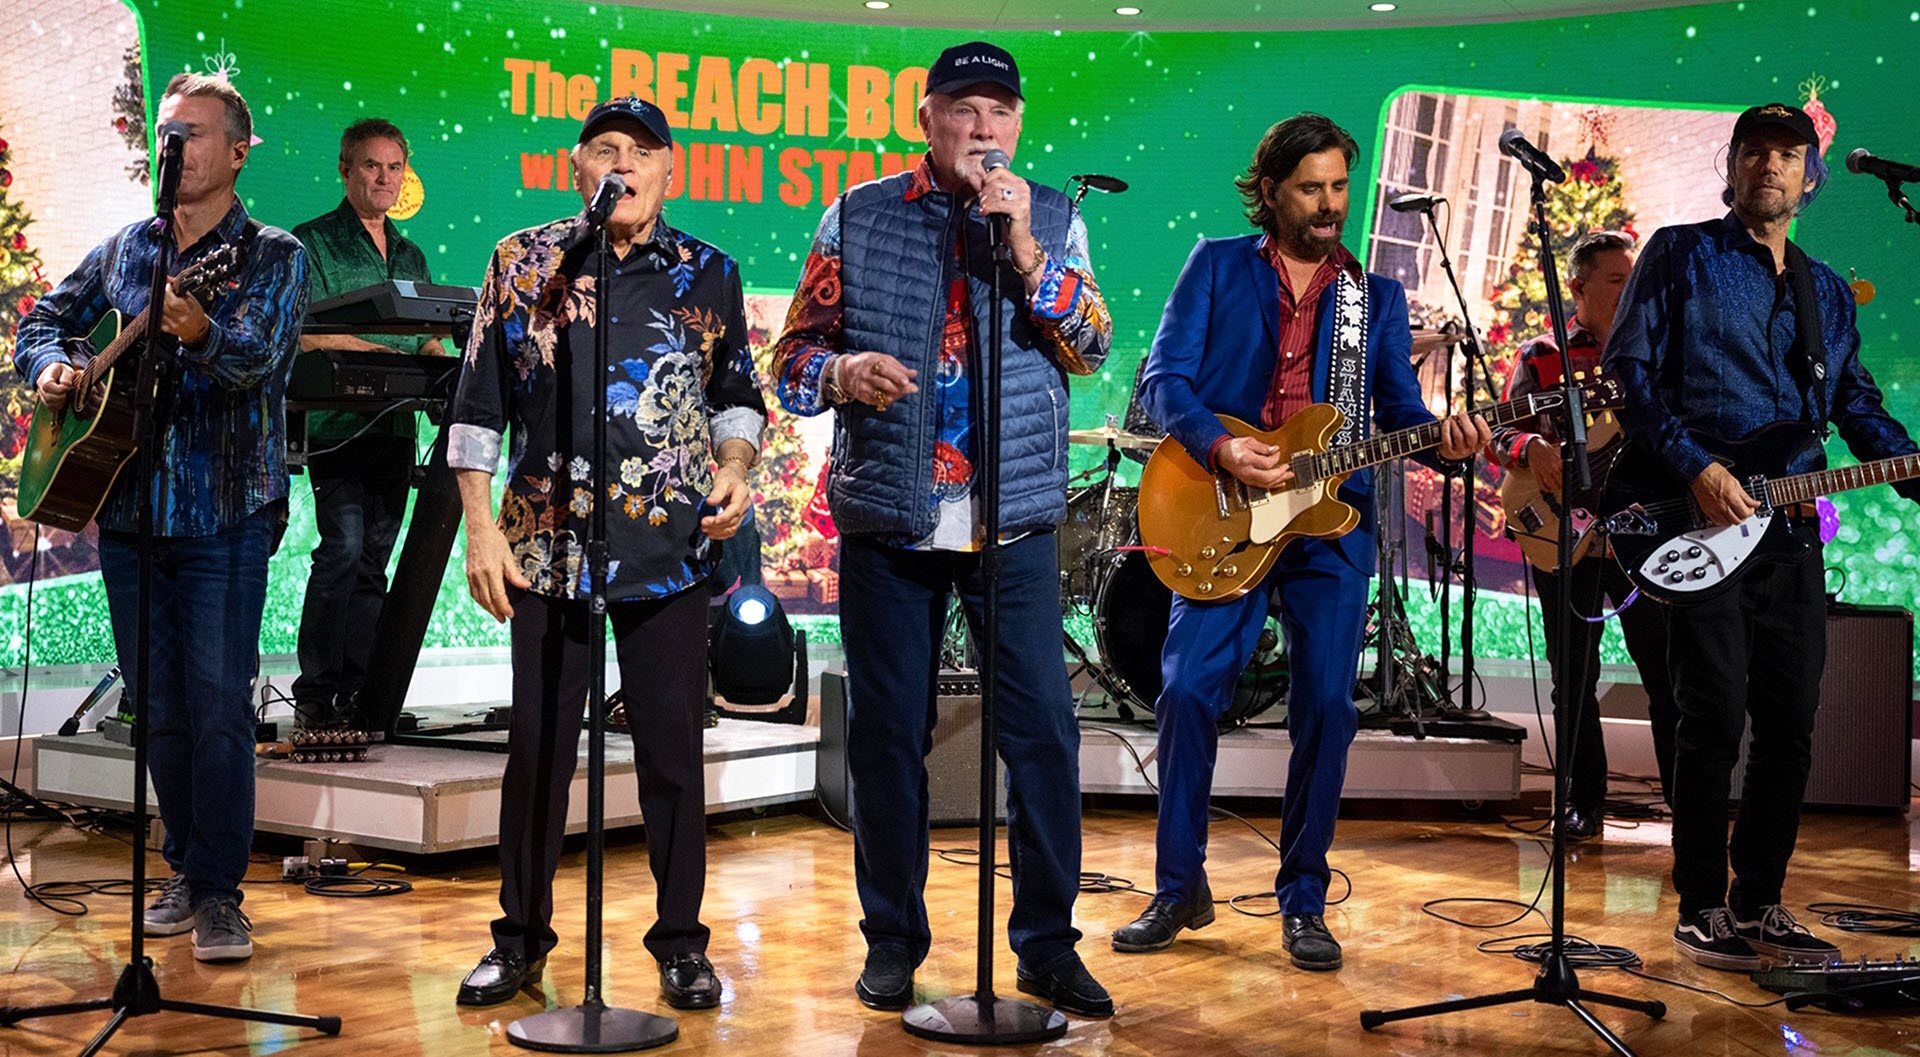 The 10 best Beach Boys songs of all time